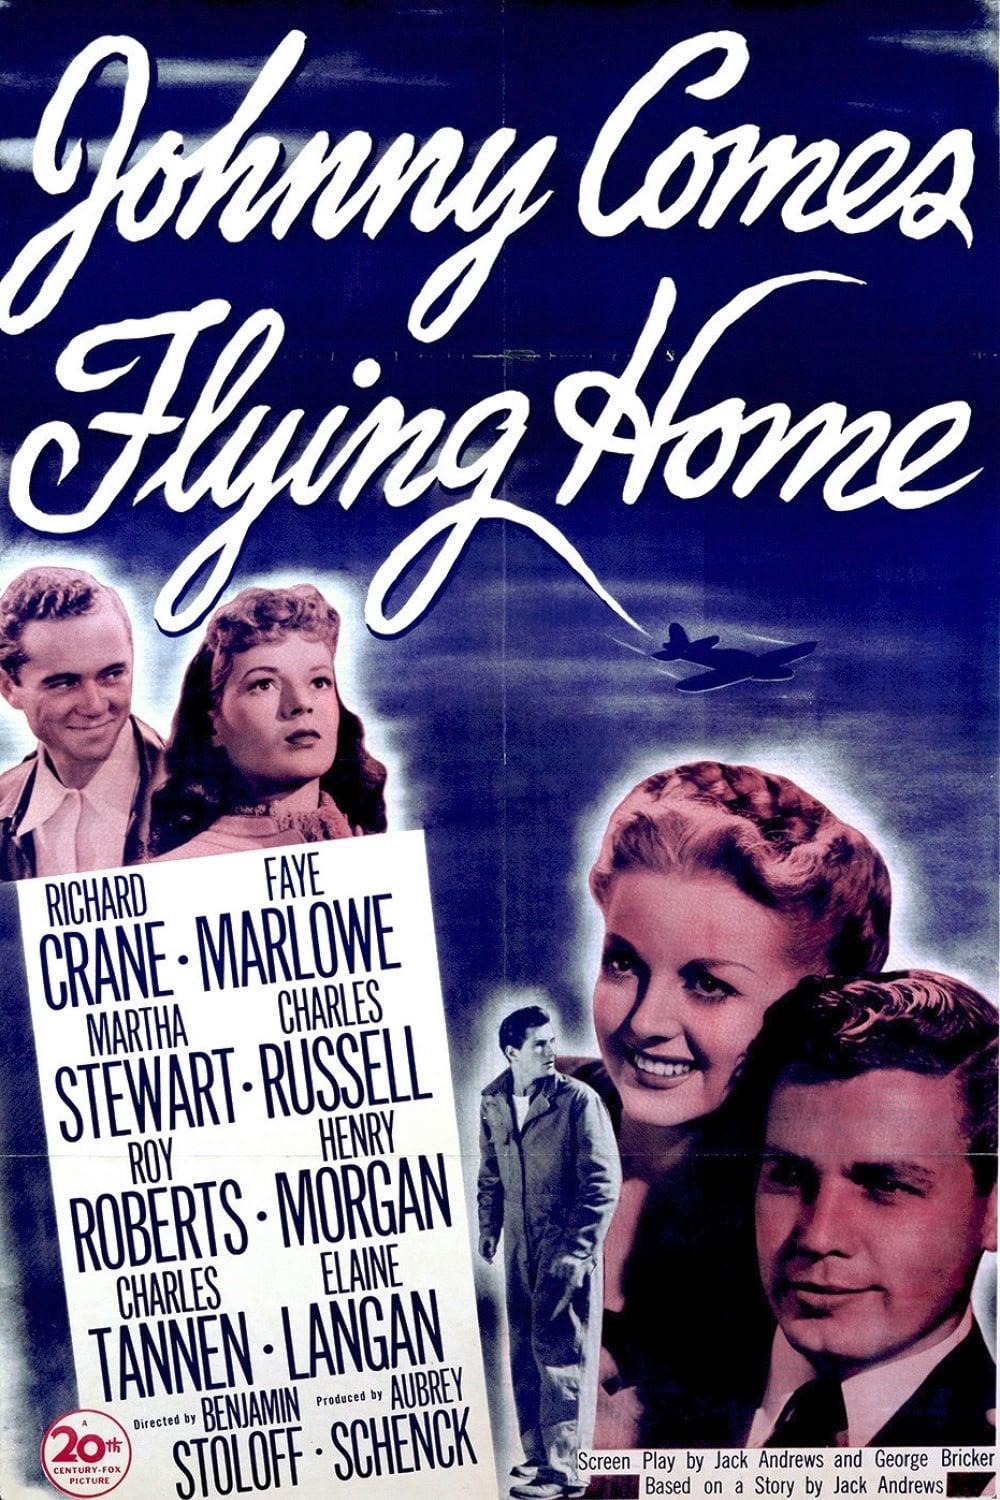 Johnny Comes Flying Home poster